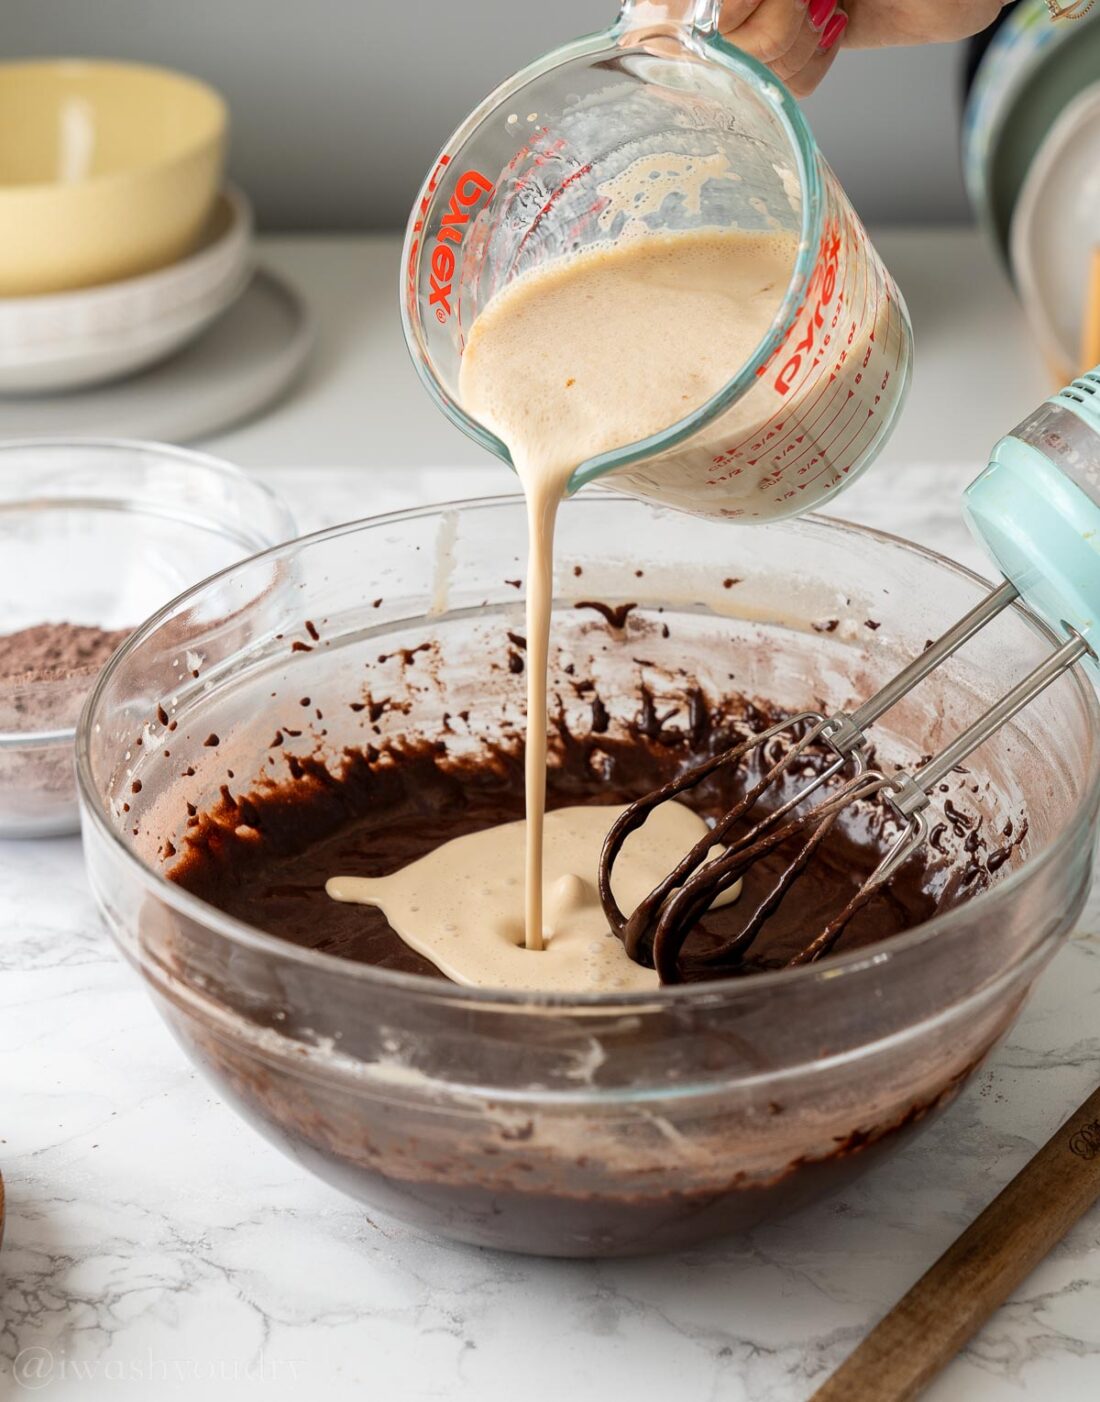 pouring buttermilk mixture with espresso powder into chocolate cake batter.